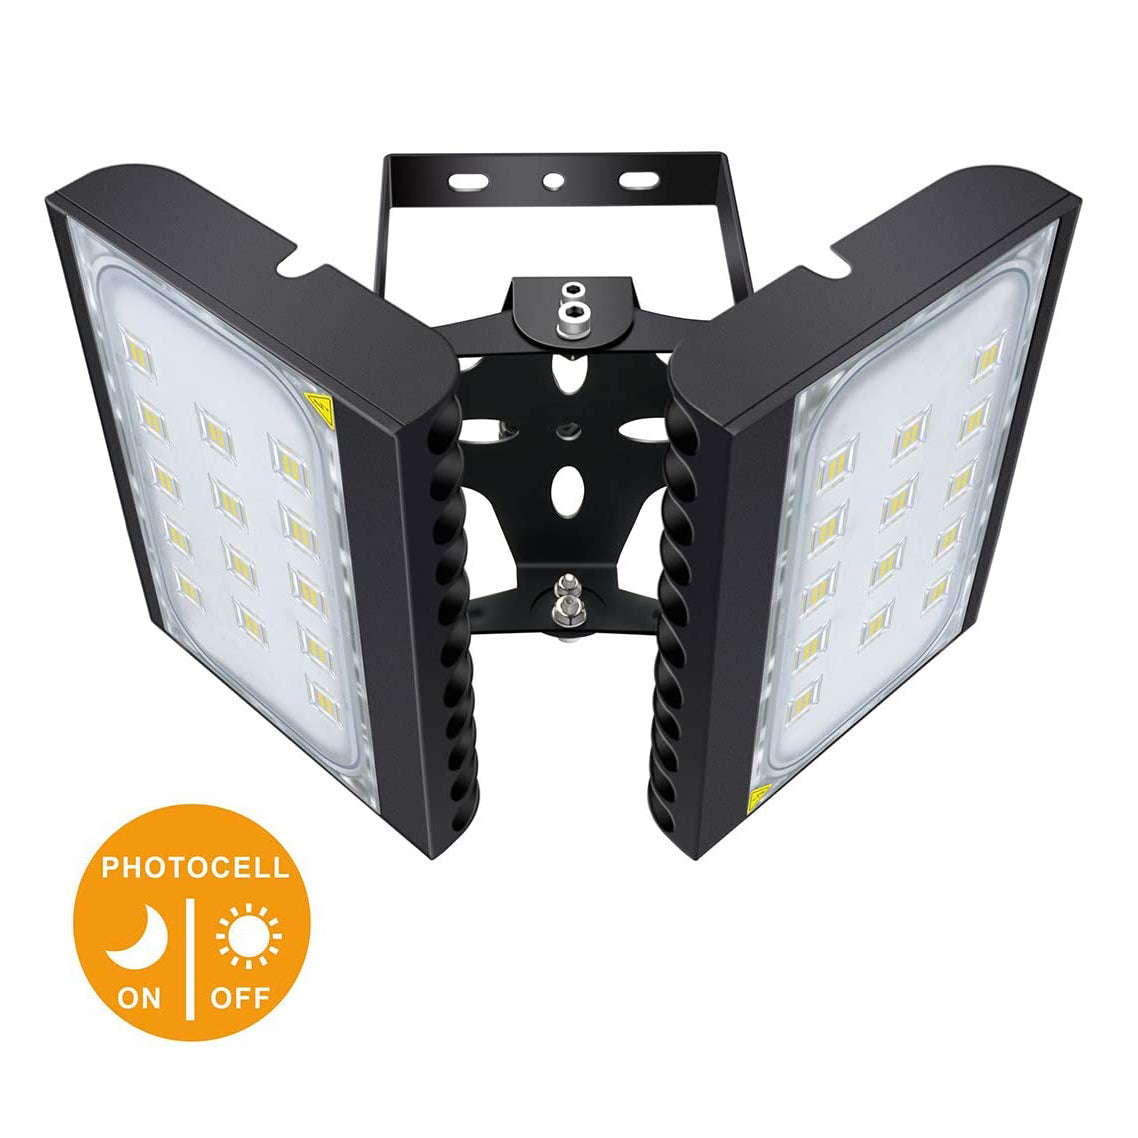 STASUN LED Flood Light Outdoor, 90W 18000lm Outdoor Area Lighting, IP66 Waterproof Exterior Floodlight Commercial Security Light, 6000K Daylight White - 2